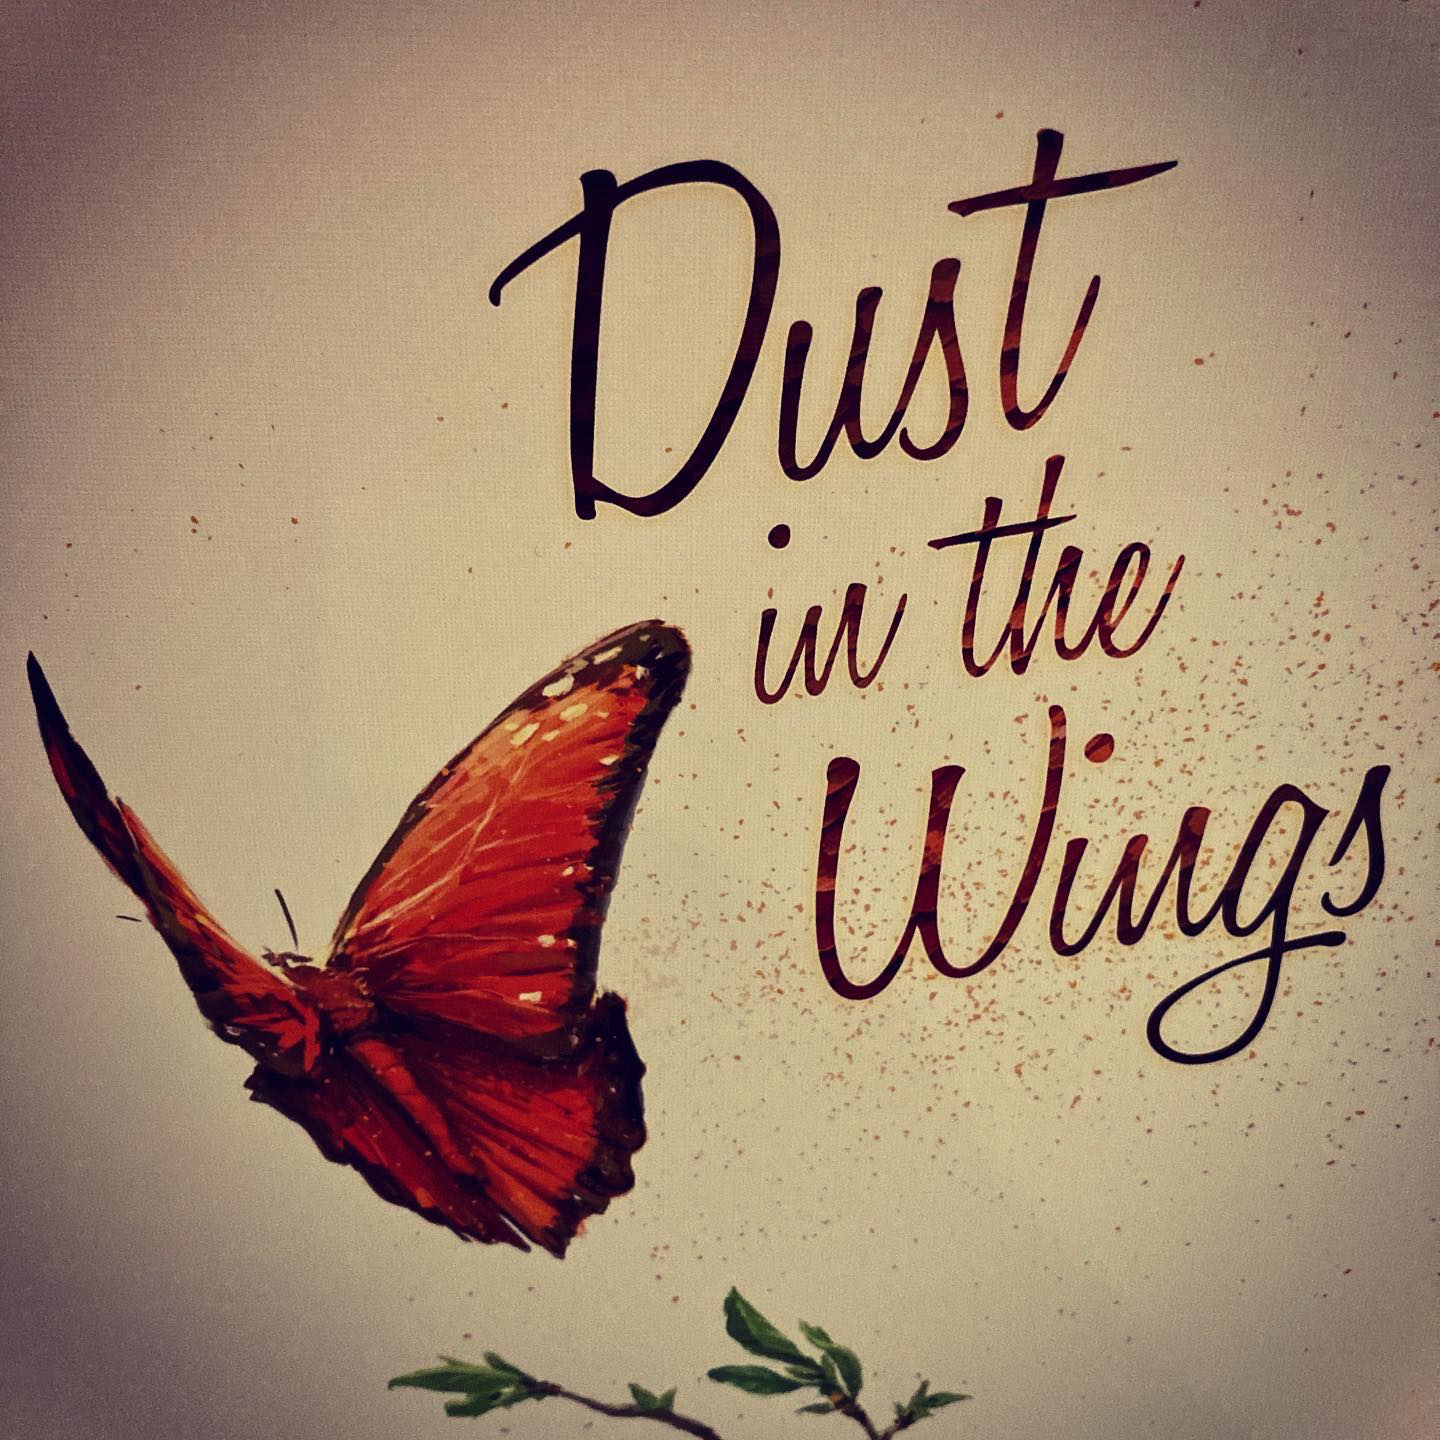 Dust in the Wings - náhled krabice